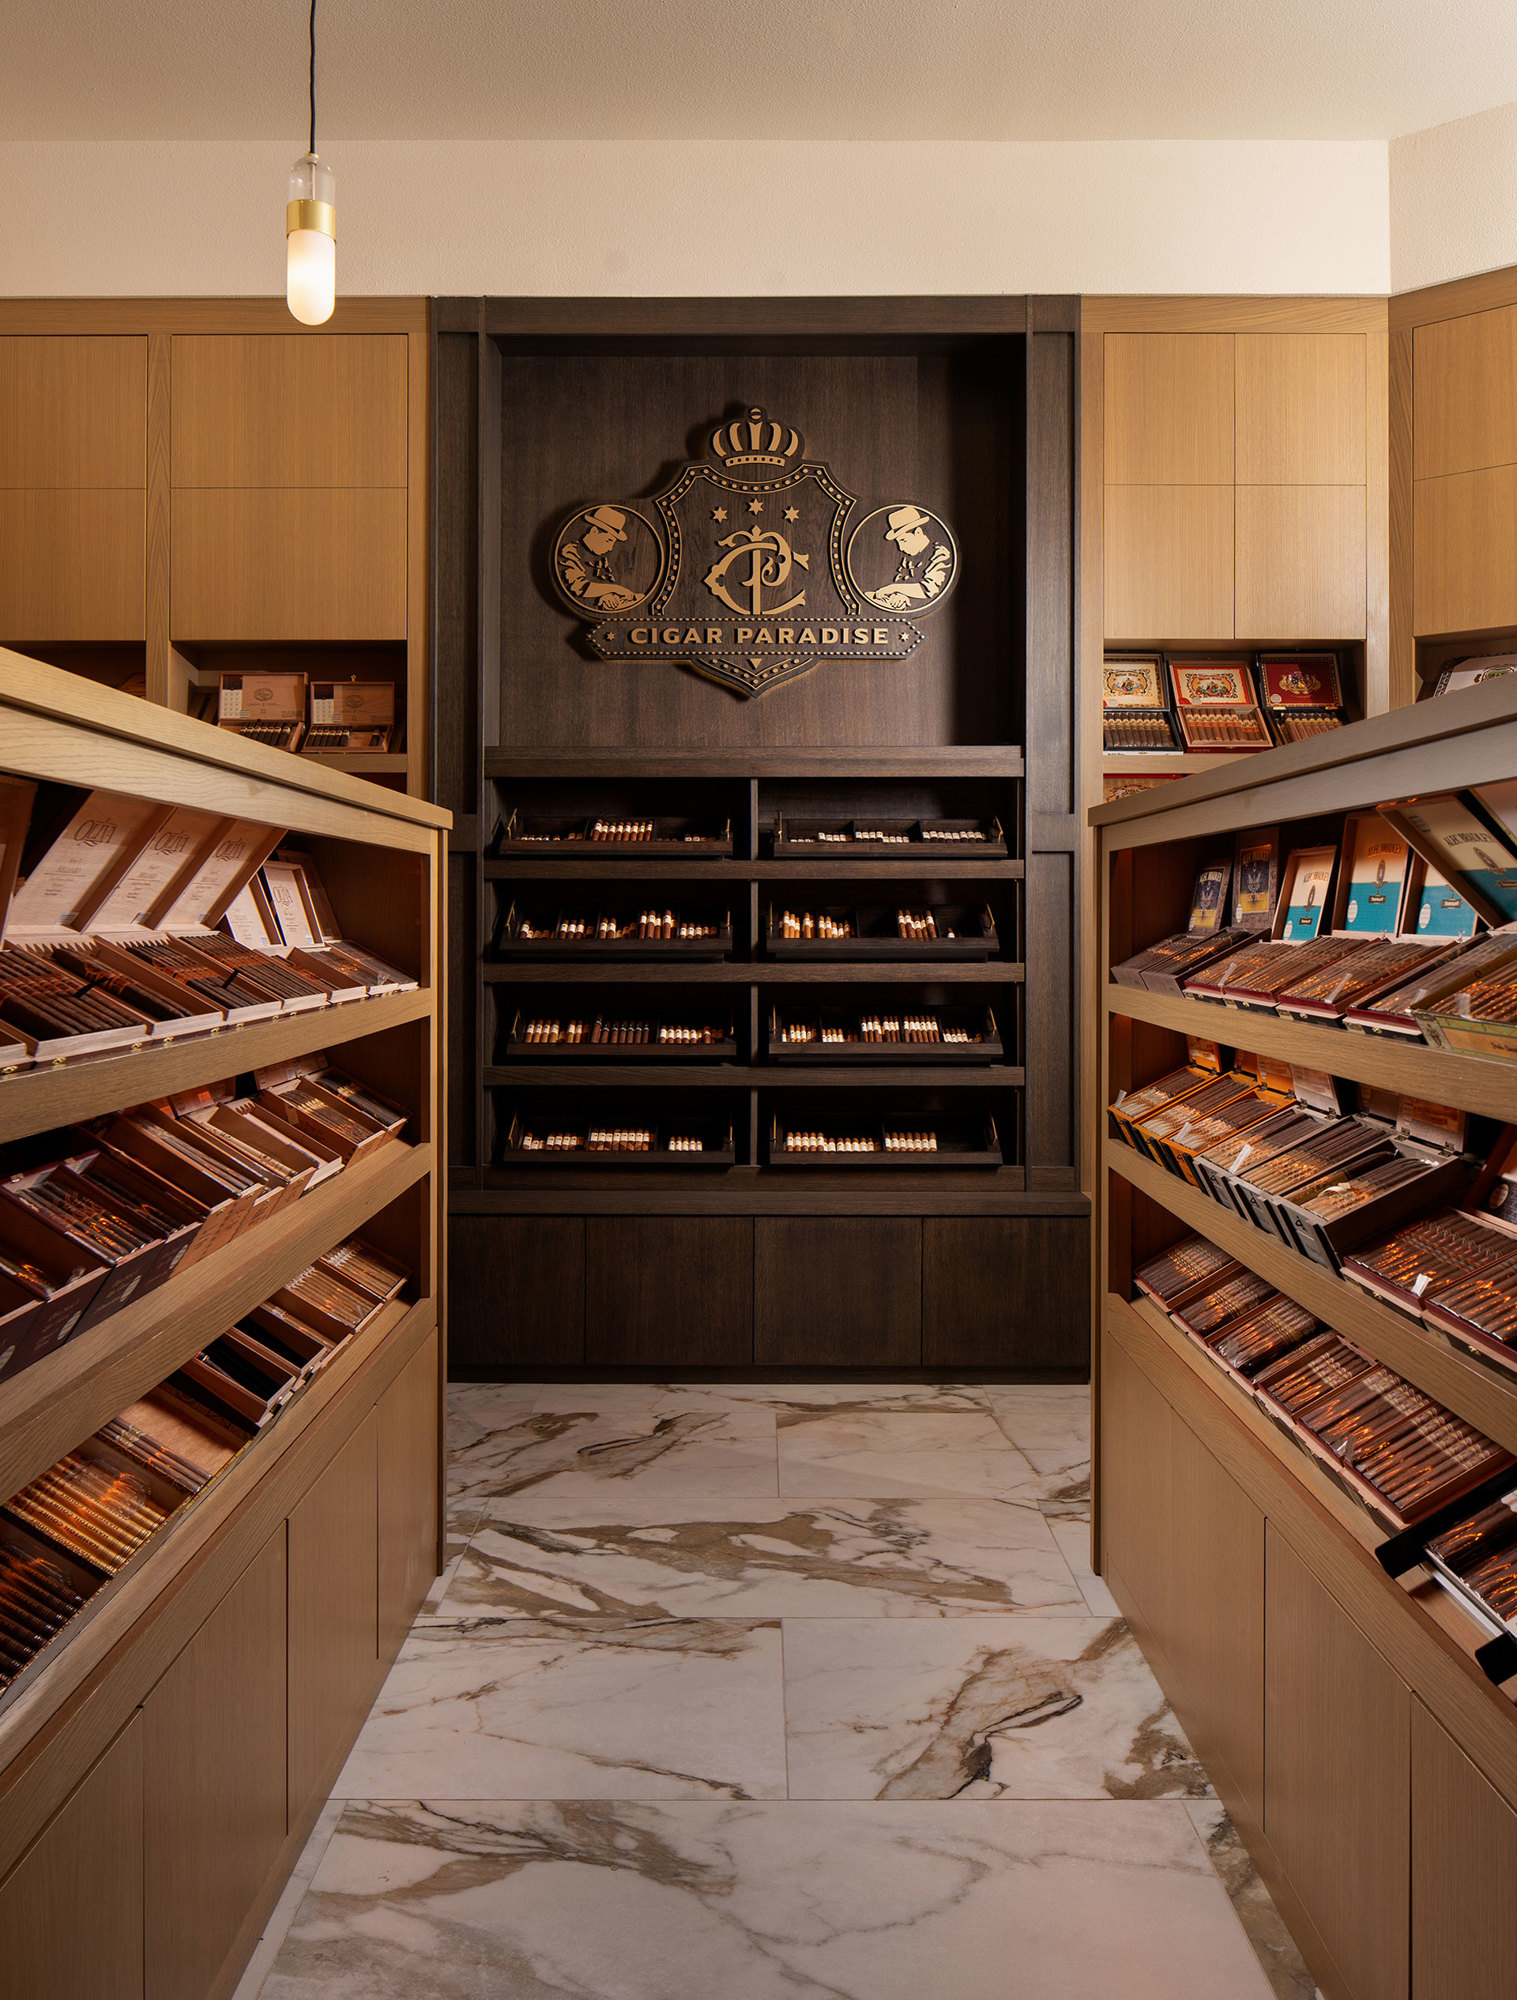 Representatives for Cigar Paradise, whose St. Petersburg location is pictured above, said the store would focus its business on retail cigar sales. Beer, wine and coffee would also be available. Image courtesy Cigar Paradise